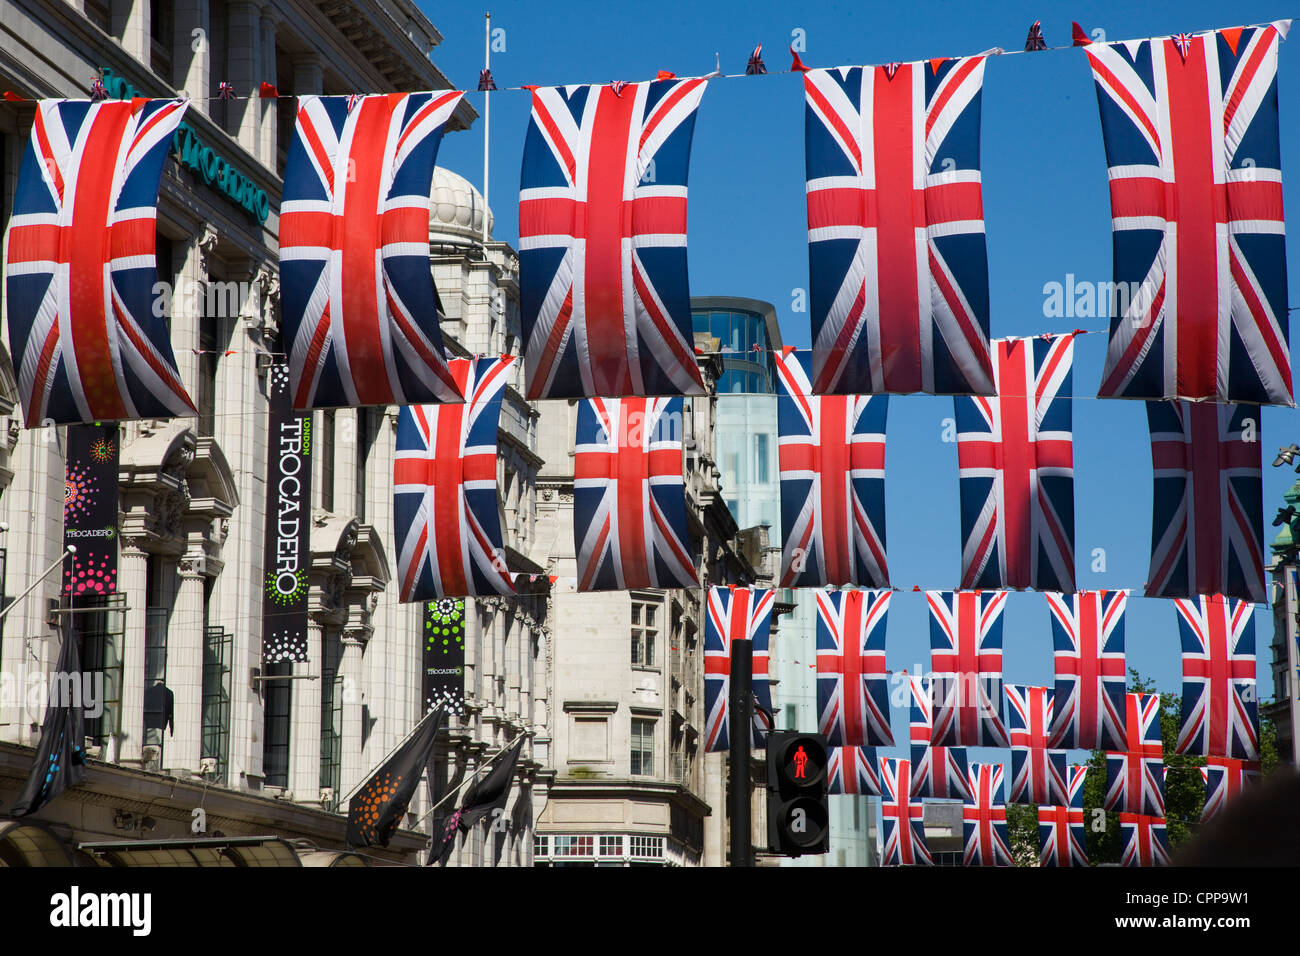 Union Jack bunting to celebrate the Queen's Diamond Jubilee in Oxford Street and Regent Street, London, UK, May 2012 Stock Photo